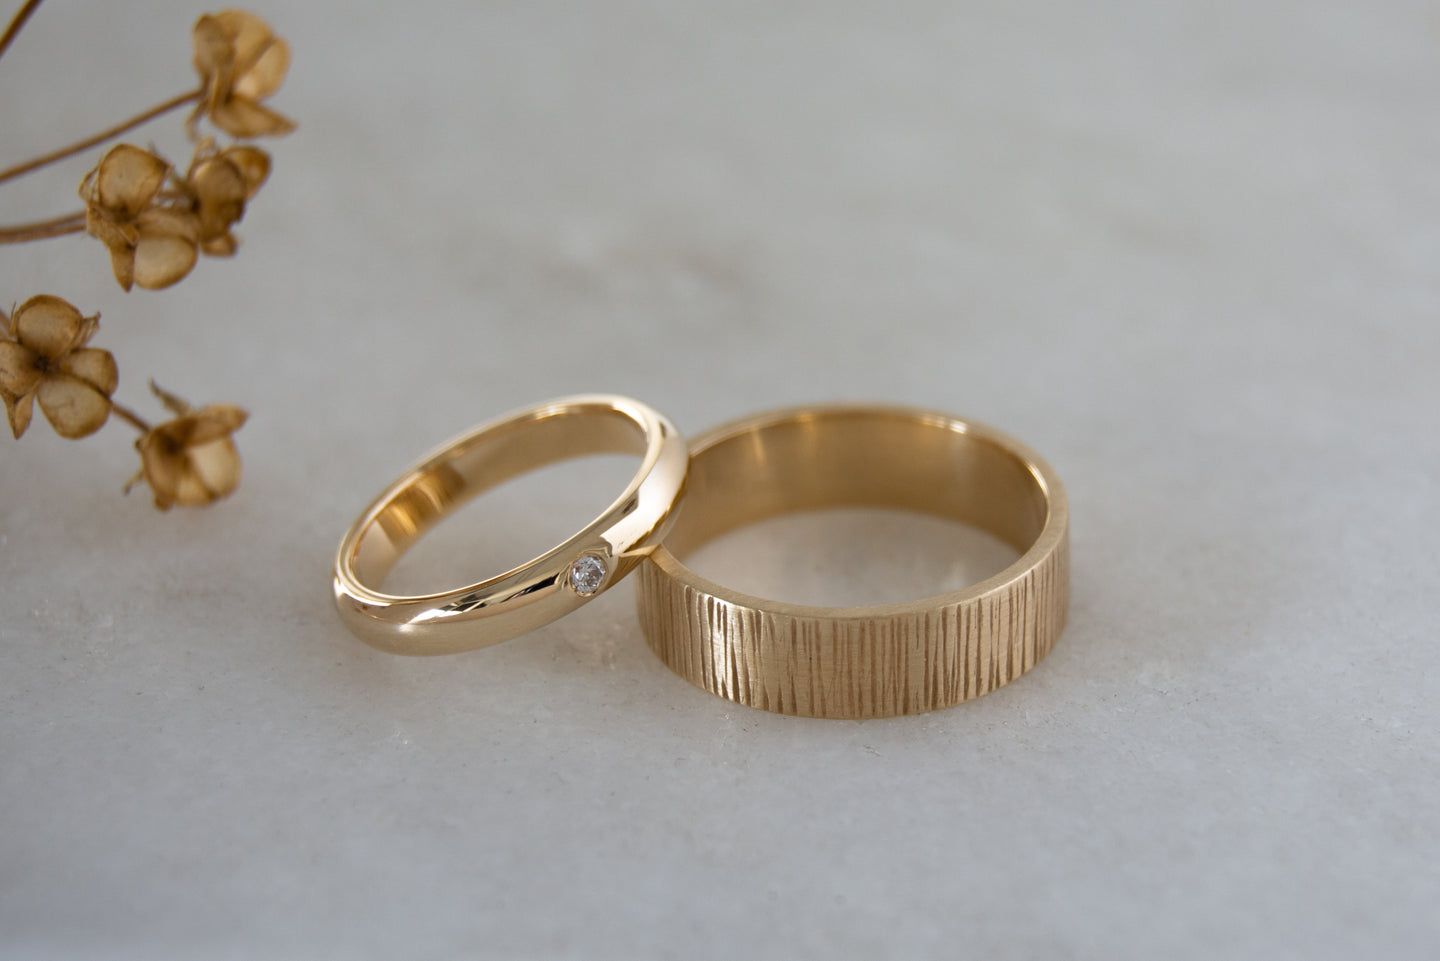 Eco-friendly gold wedding rings. Recycled gold, green wedding rings